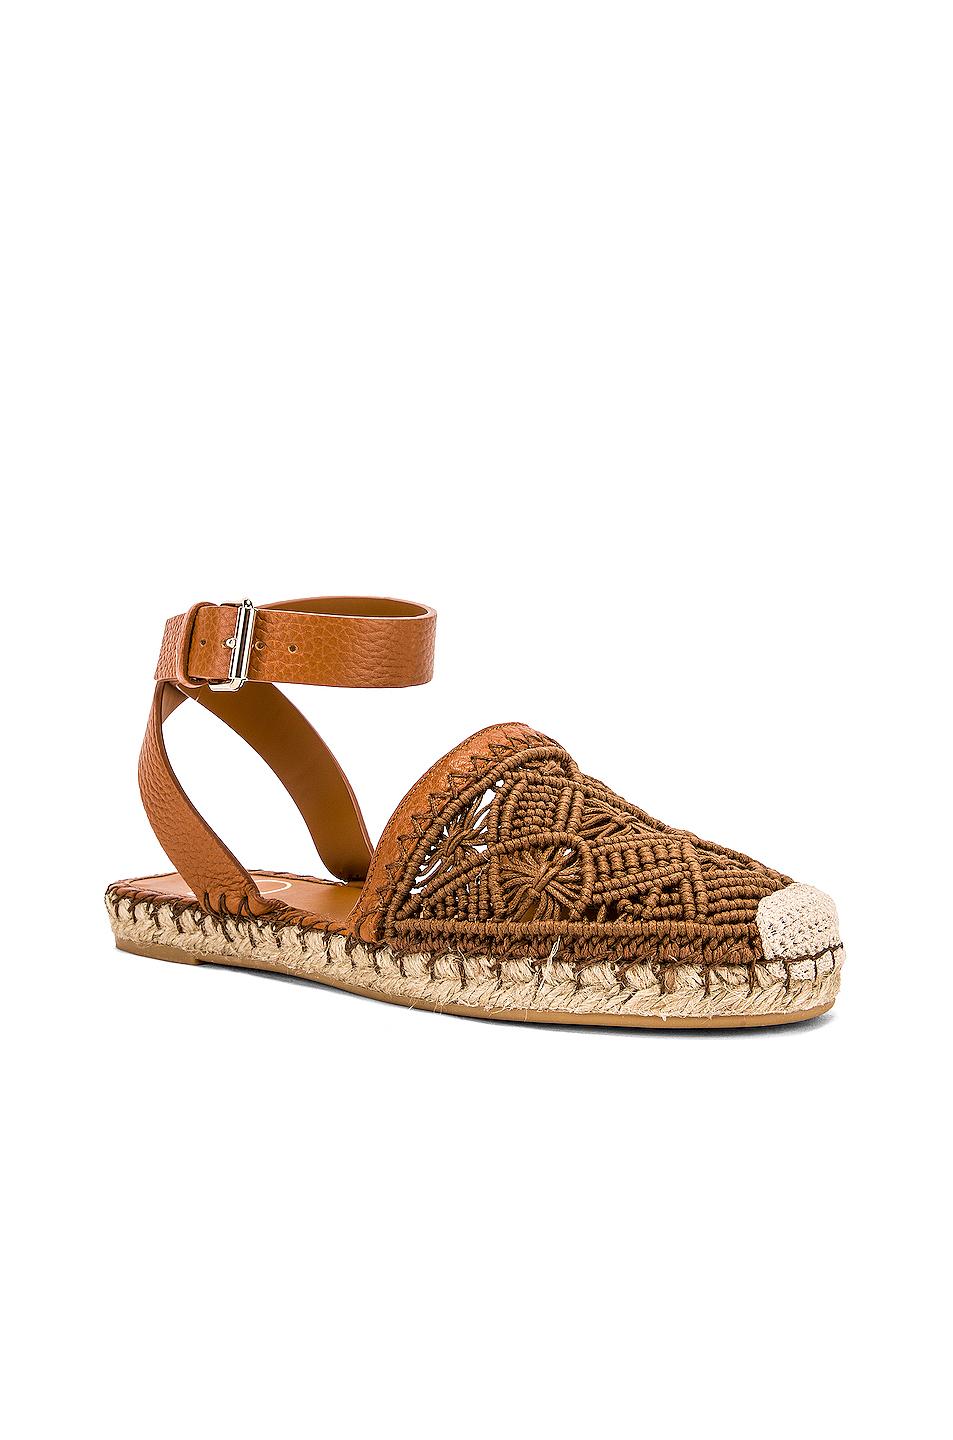 Valentino Marrakech Macramé And Leather Espadrilles in Tan (Brown) - Lyst